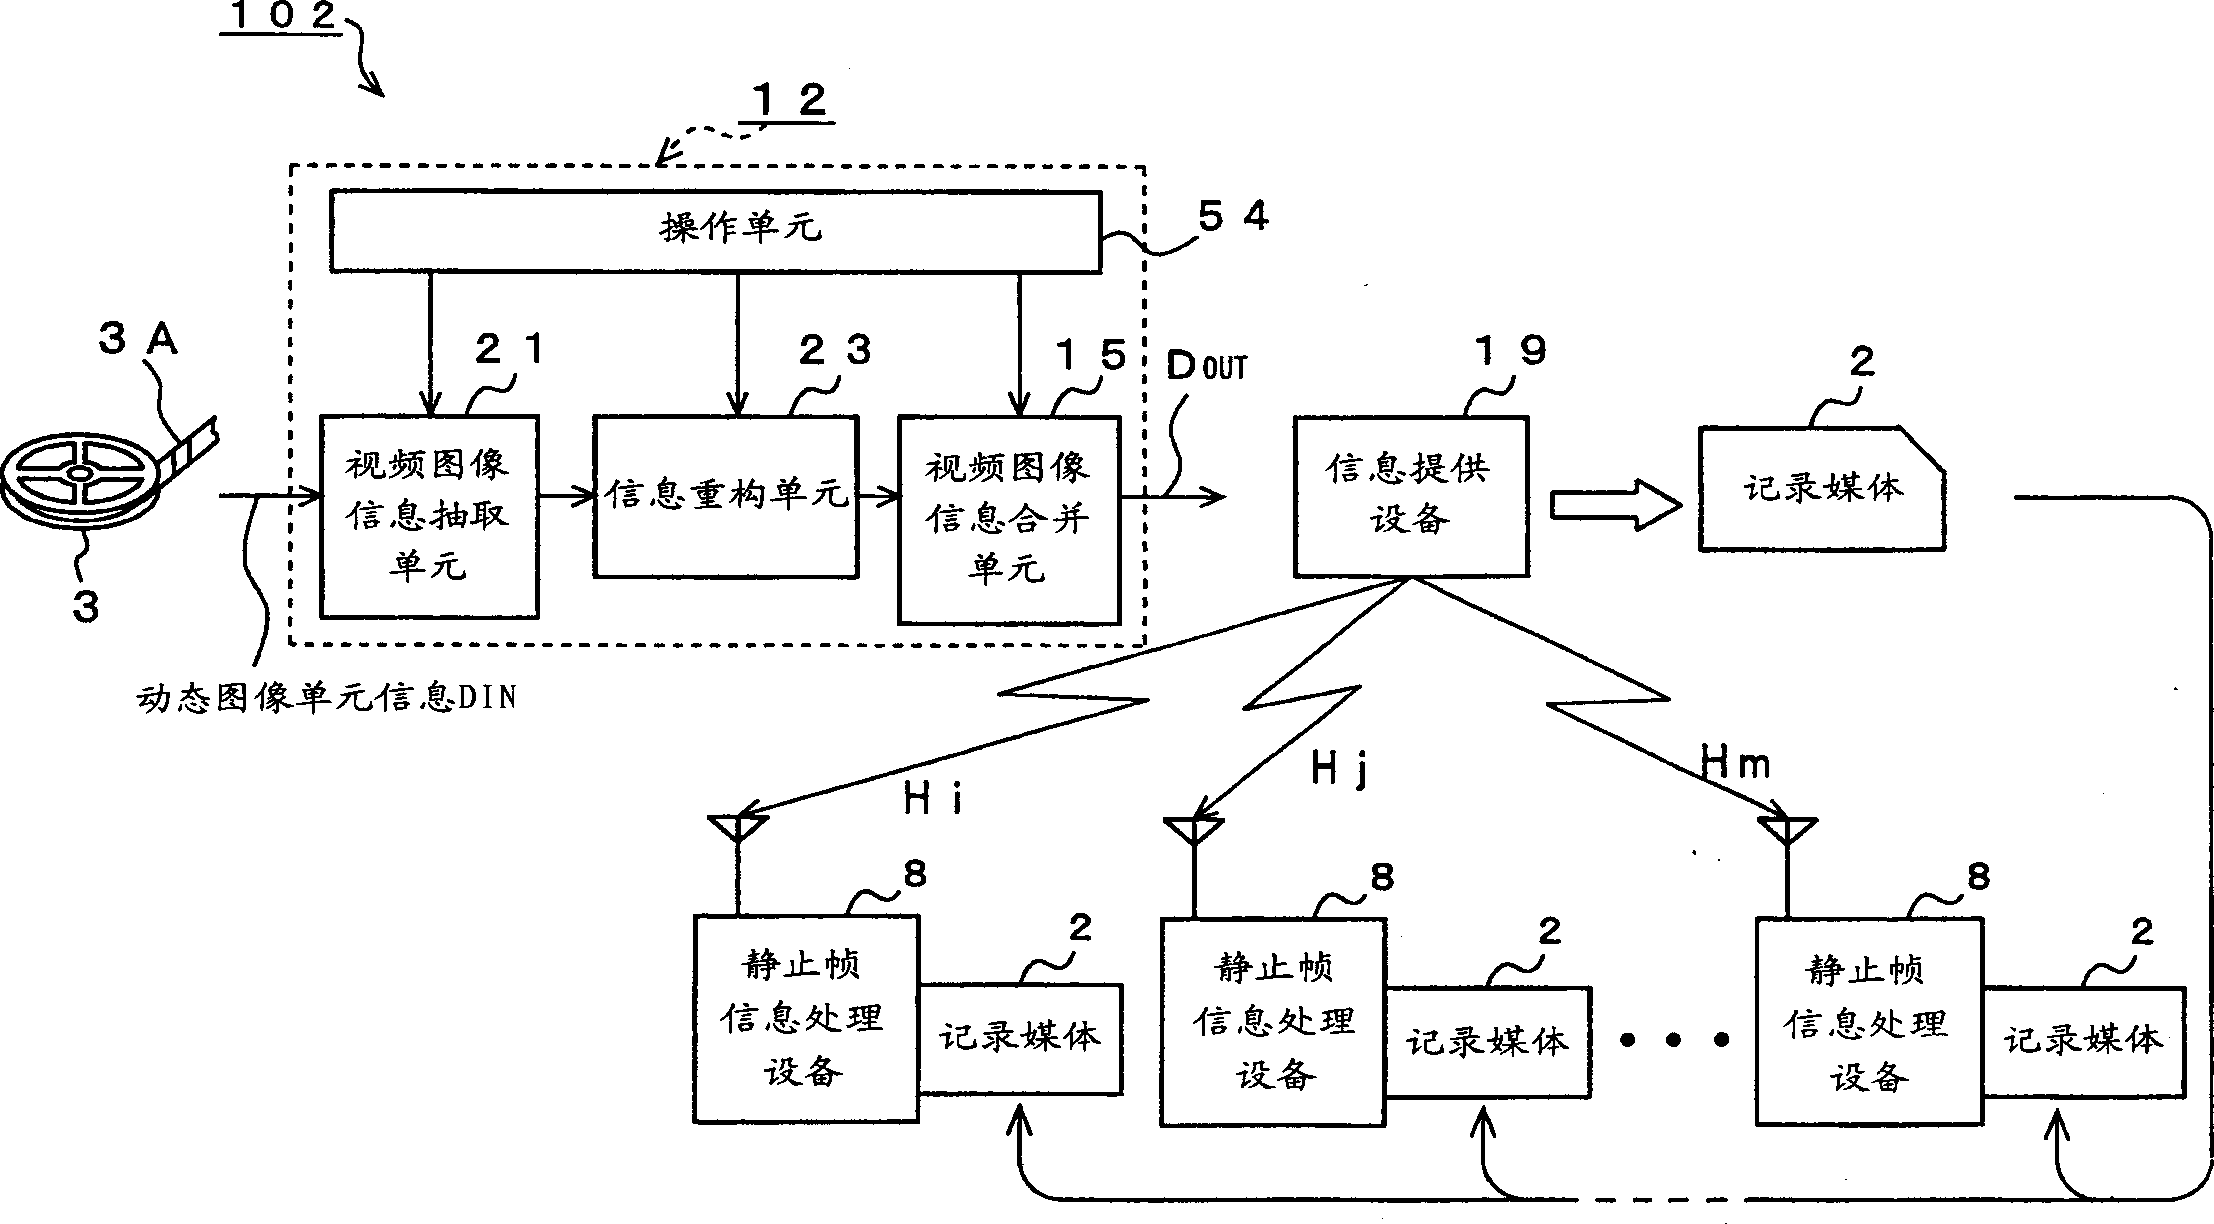 System and method for providing sequencial static image from cartoon works to user